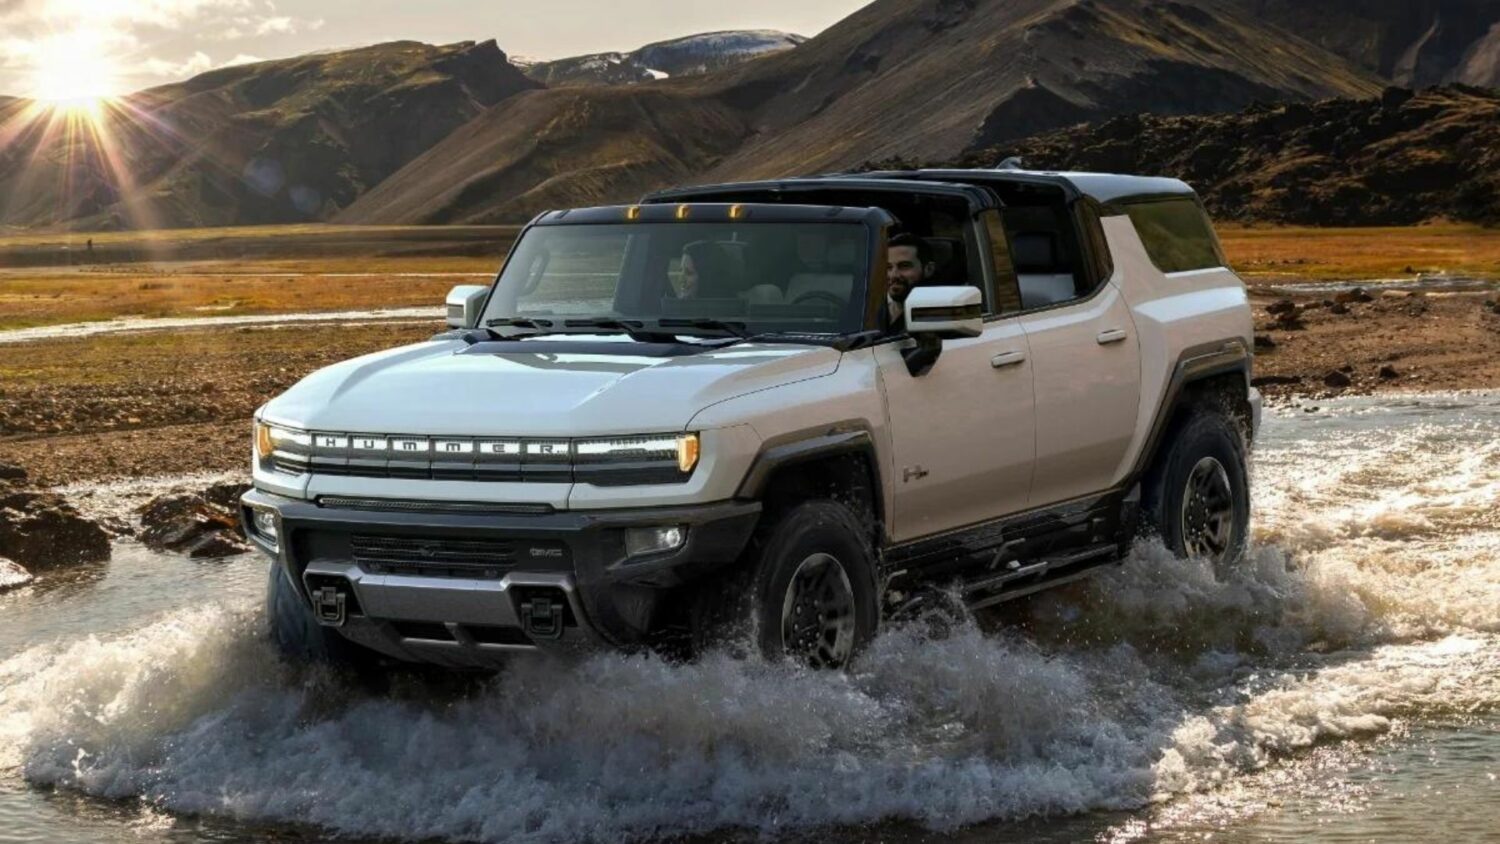 General Motors has started producing the 2024 GMC Hummer SUV